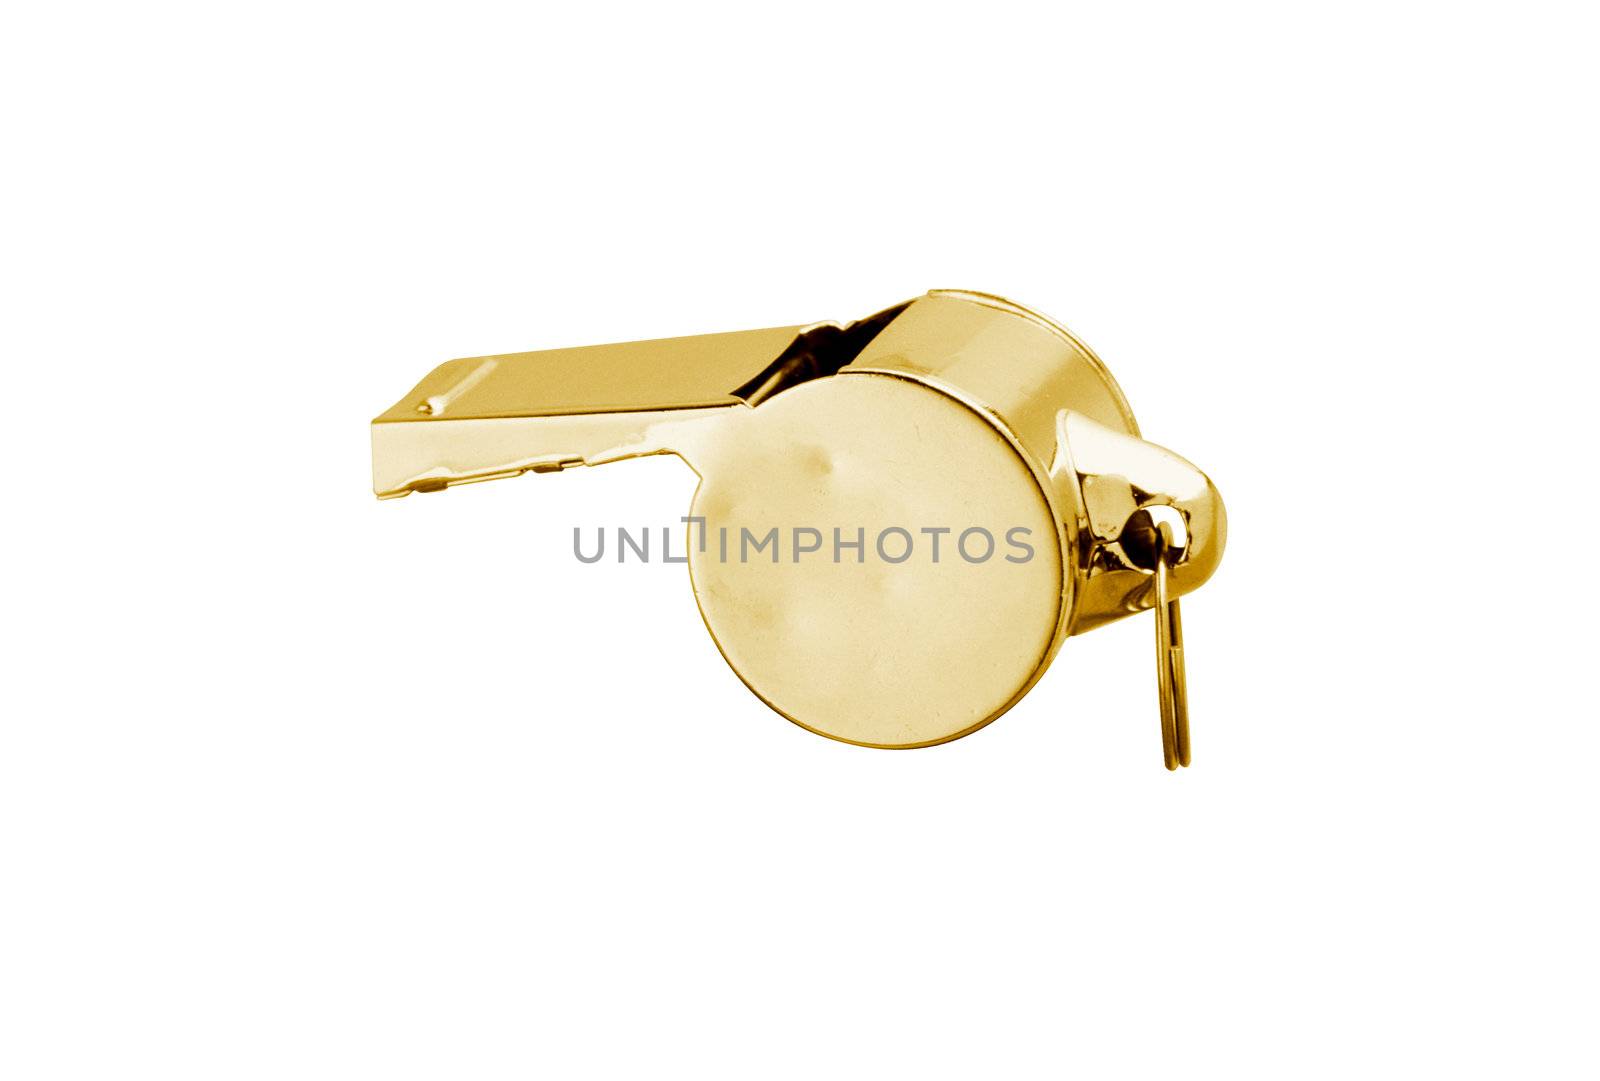 Golden whistle pendant isolated on white by shutswis